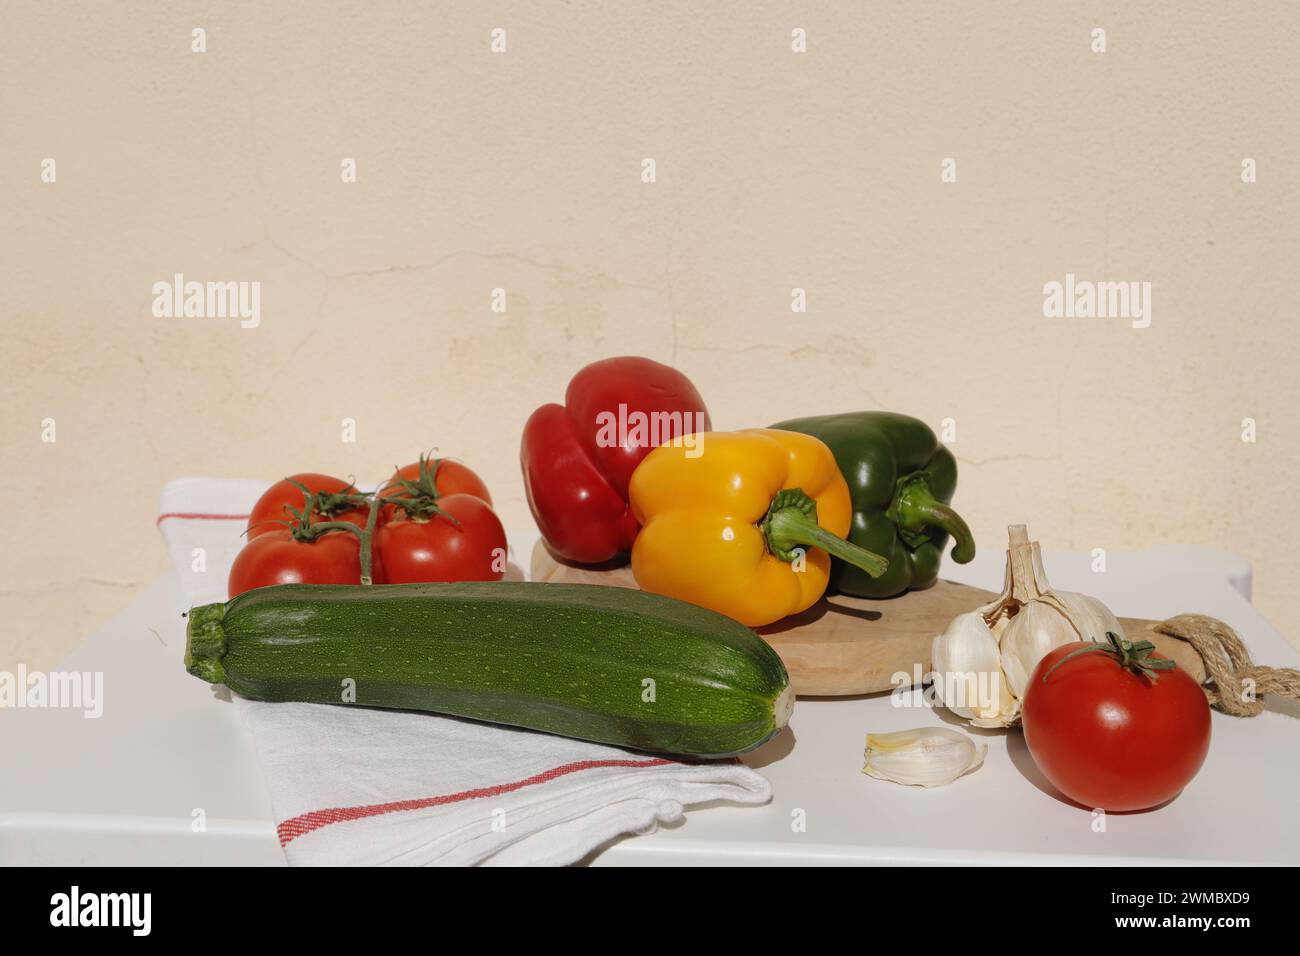 fresh vegetables tomato, bell pepper, courgette, garlic. Healthy food also favorite by vegetarian and vegan Stock Photo